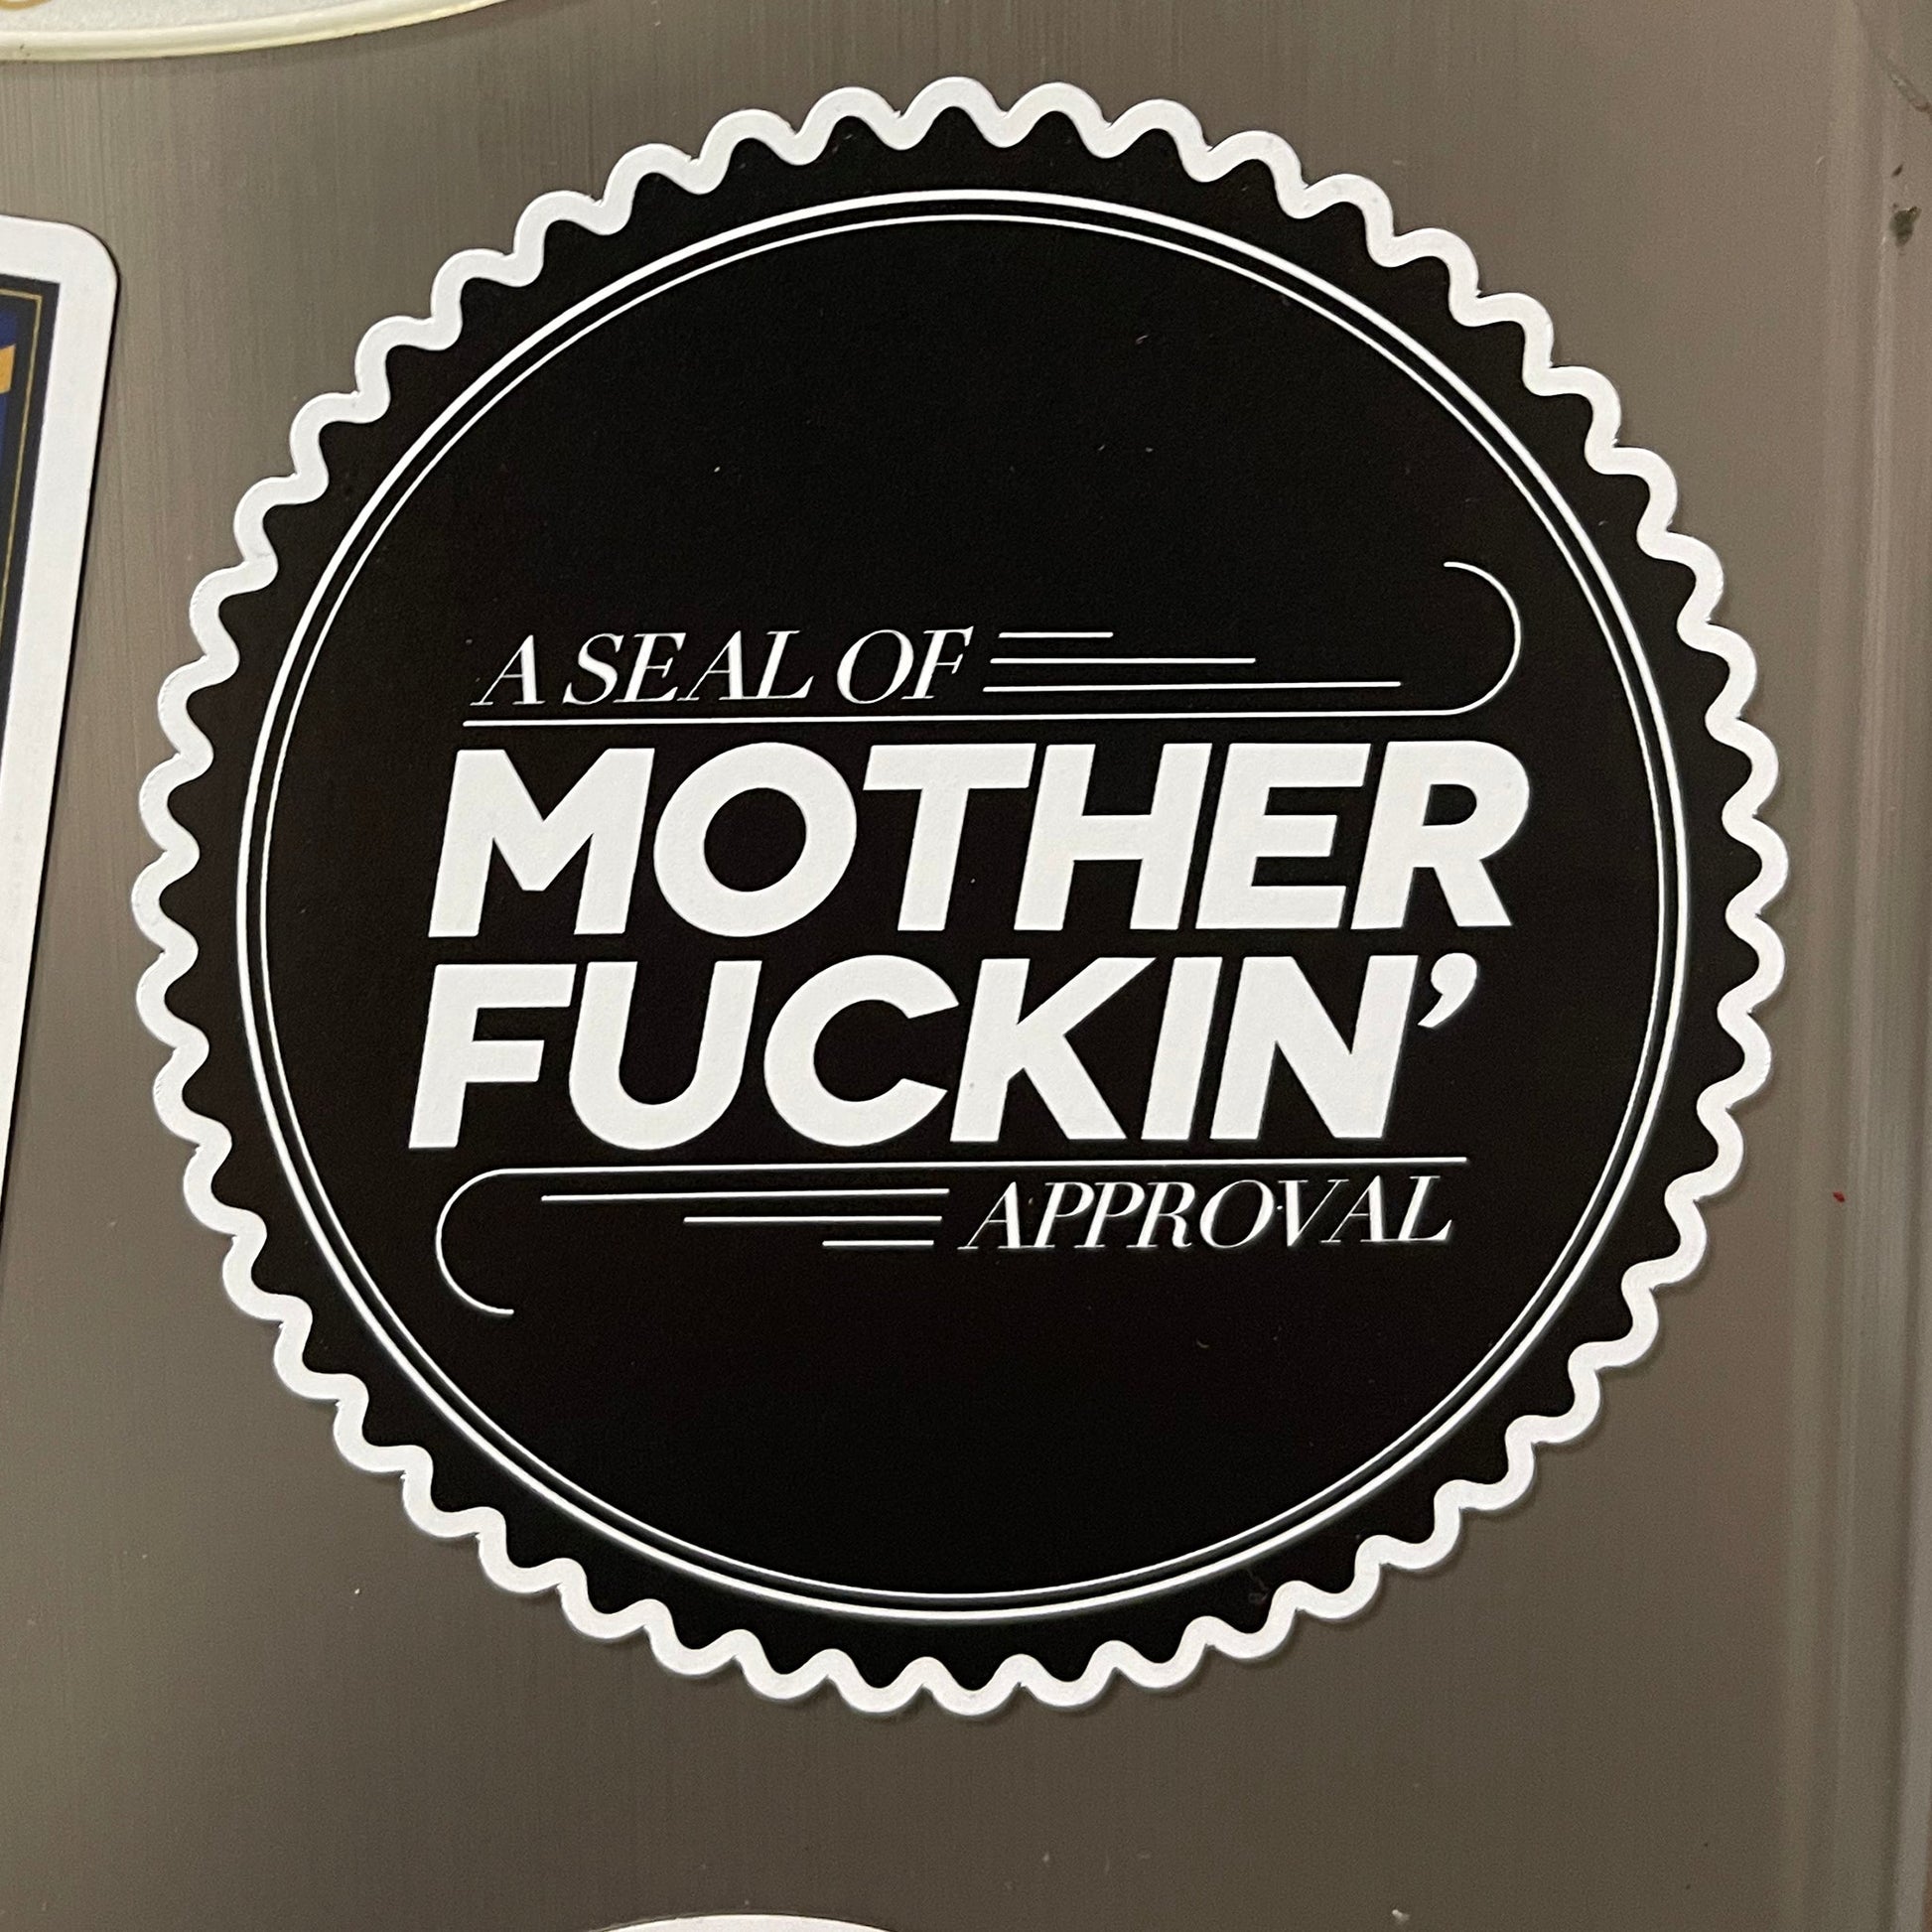 A Seal of MotherFuckin' Approval Magnet Cleaverandblade.com